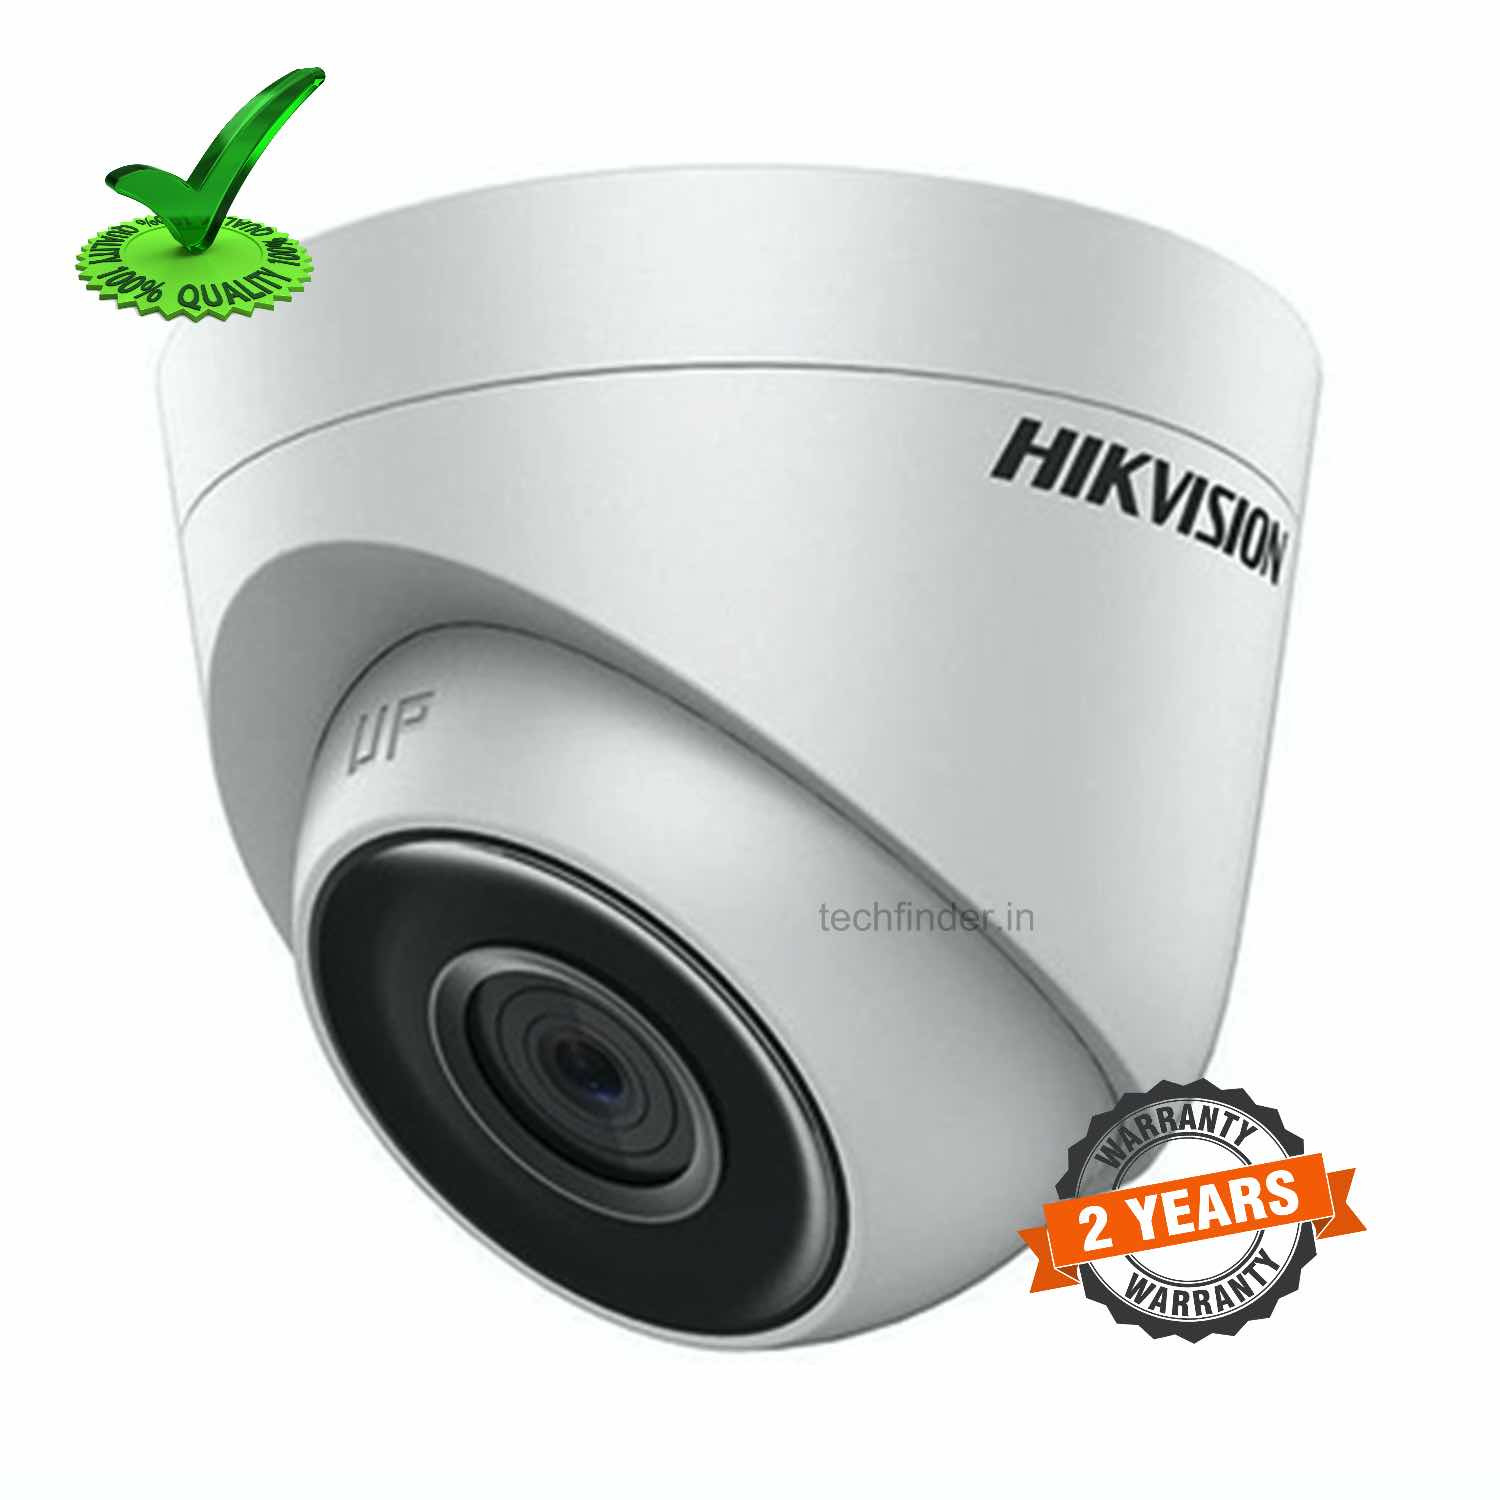 Hikvision DS 2CE56H0T ITPF 5 Mp HD IR Dome Camera